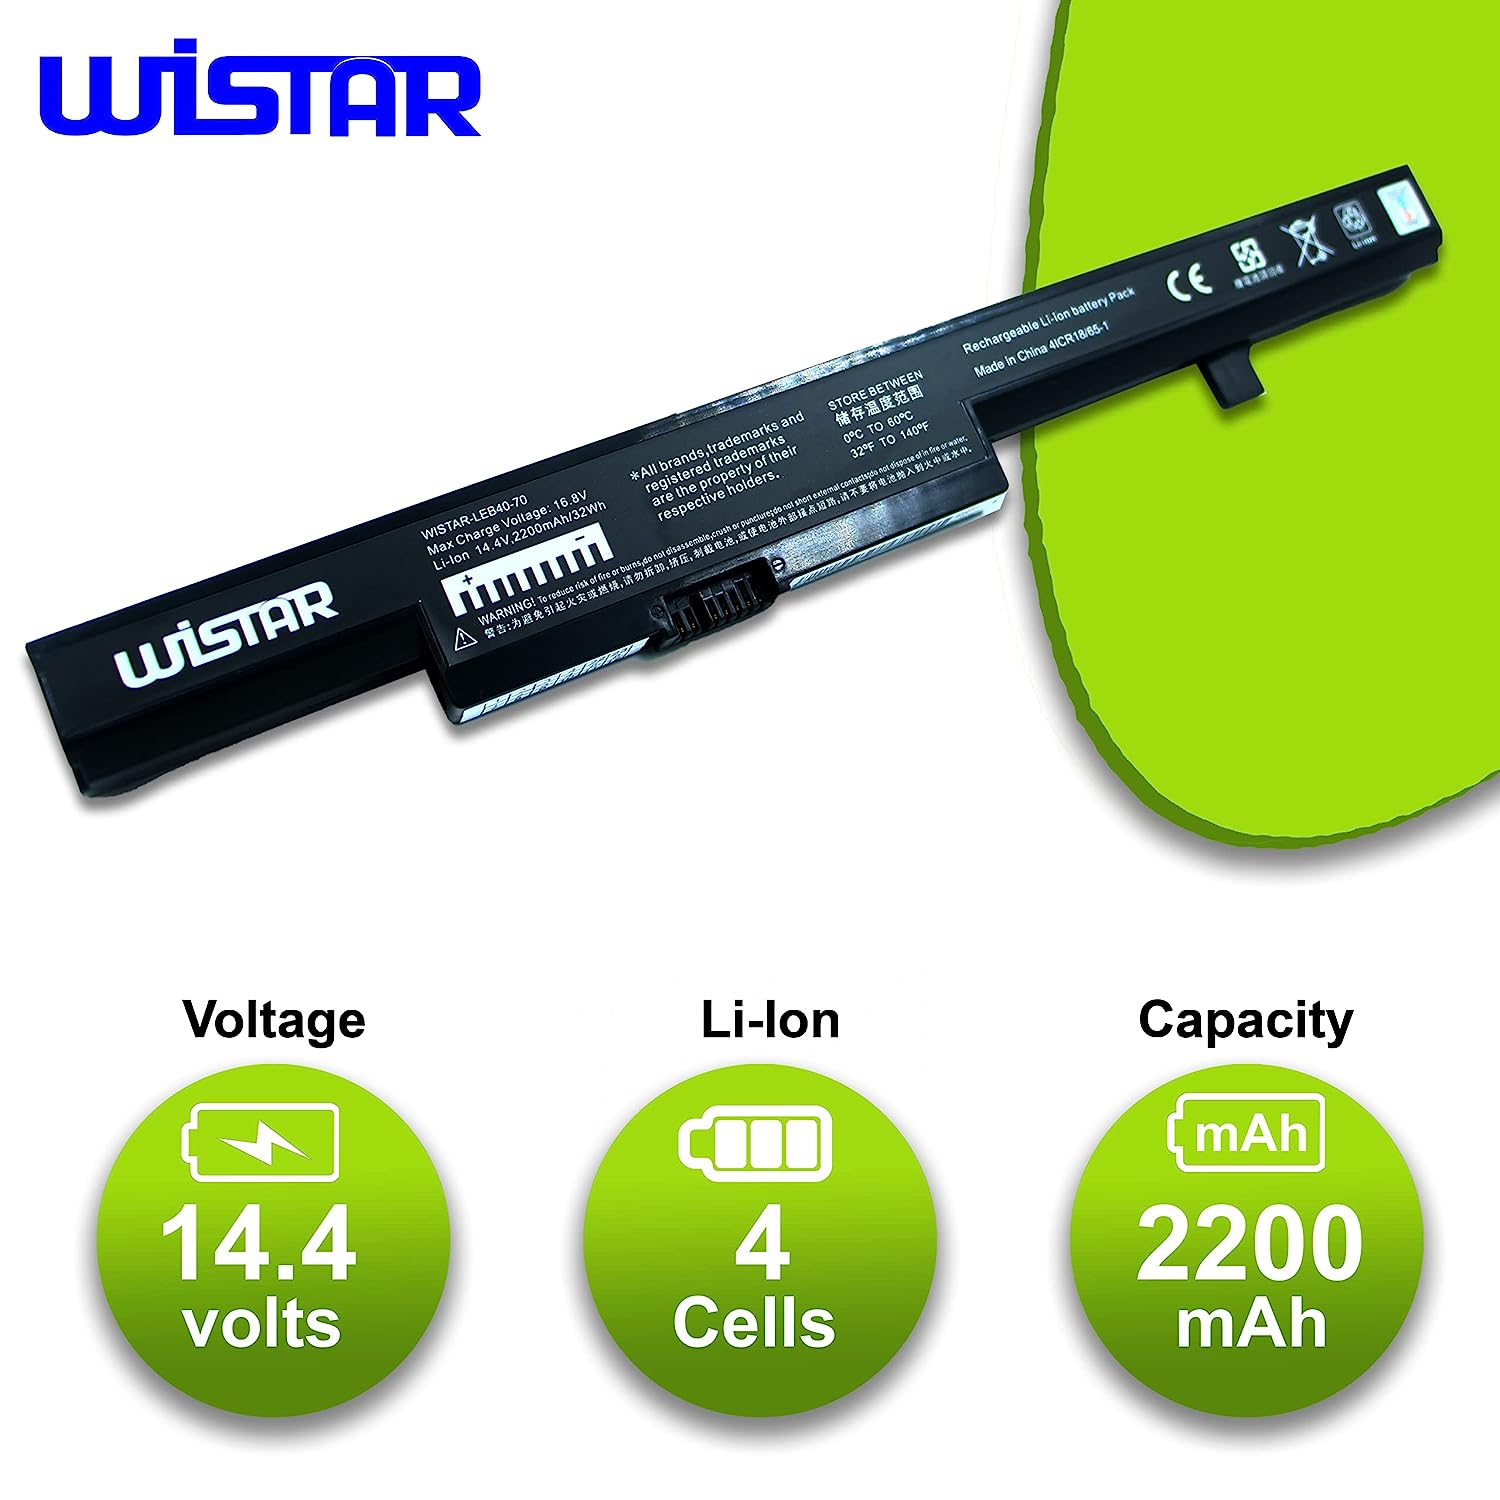 WISTAR Laptop Battery Compatible for Lenovo B40-45 B40-70 B50 B50-30 L12M4E55 L12S4E55 L13L4A01 L13M4A01 L13S4A01 Laptop Battery 4 Cell Laptop Battery